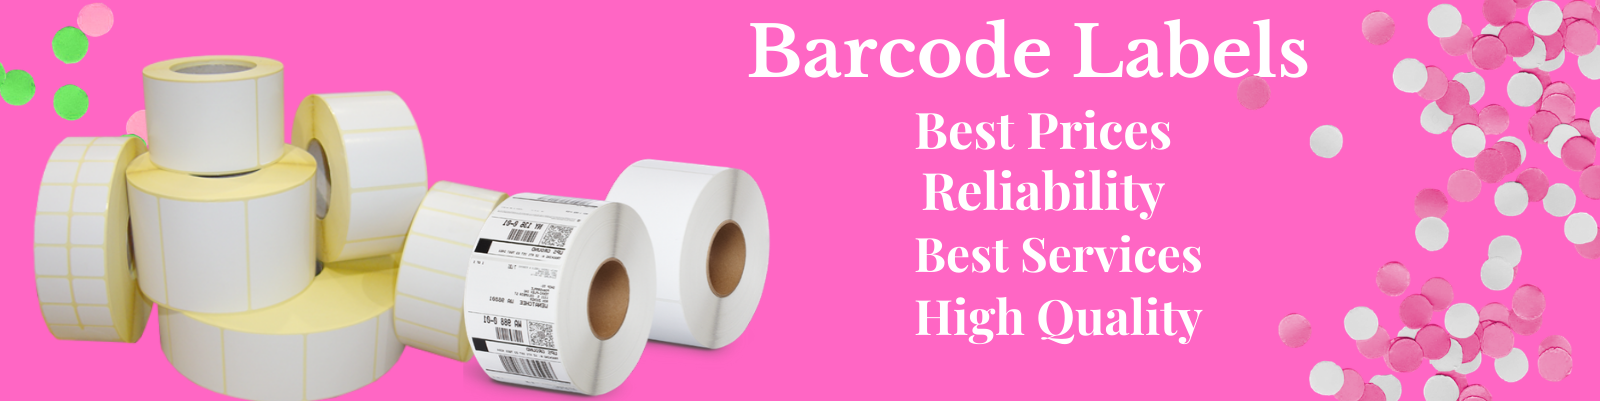 Barcode Labels Best Prices